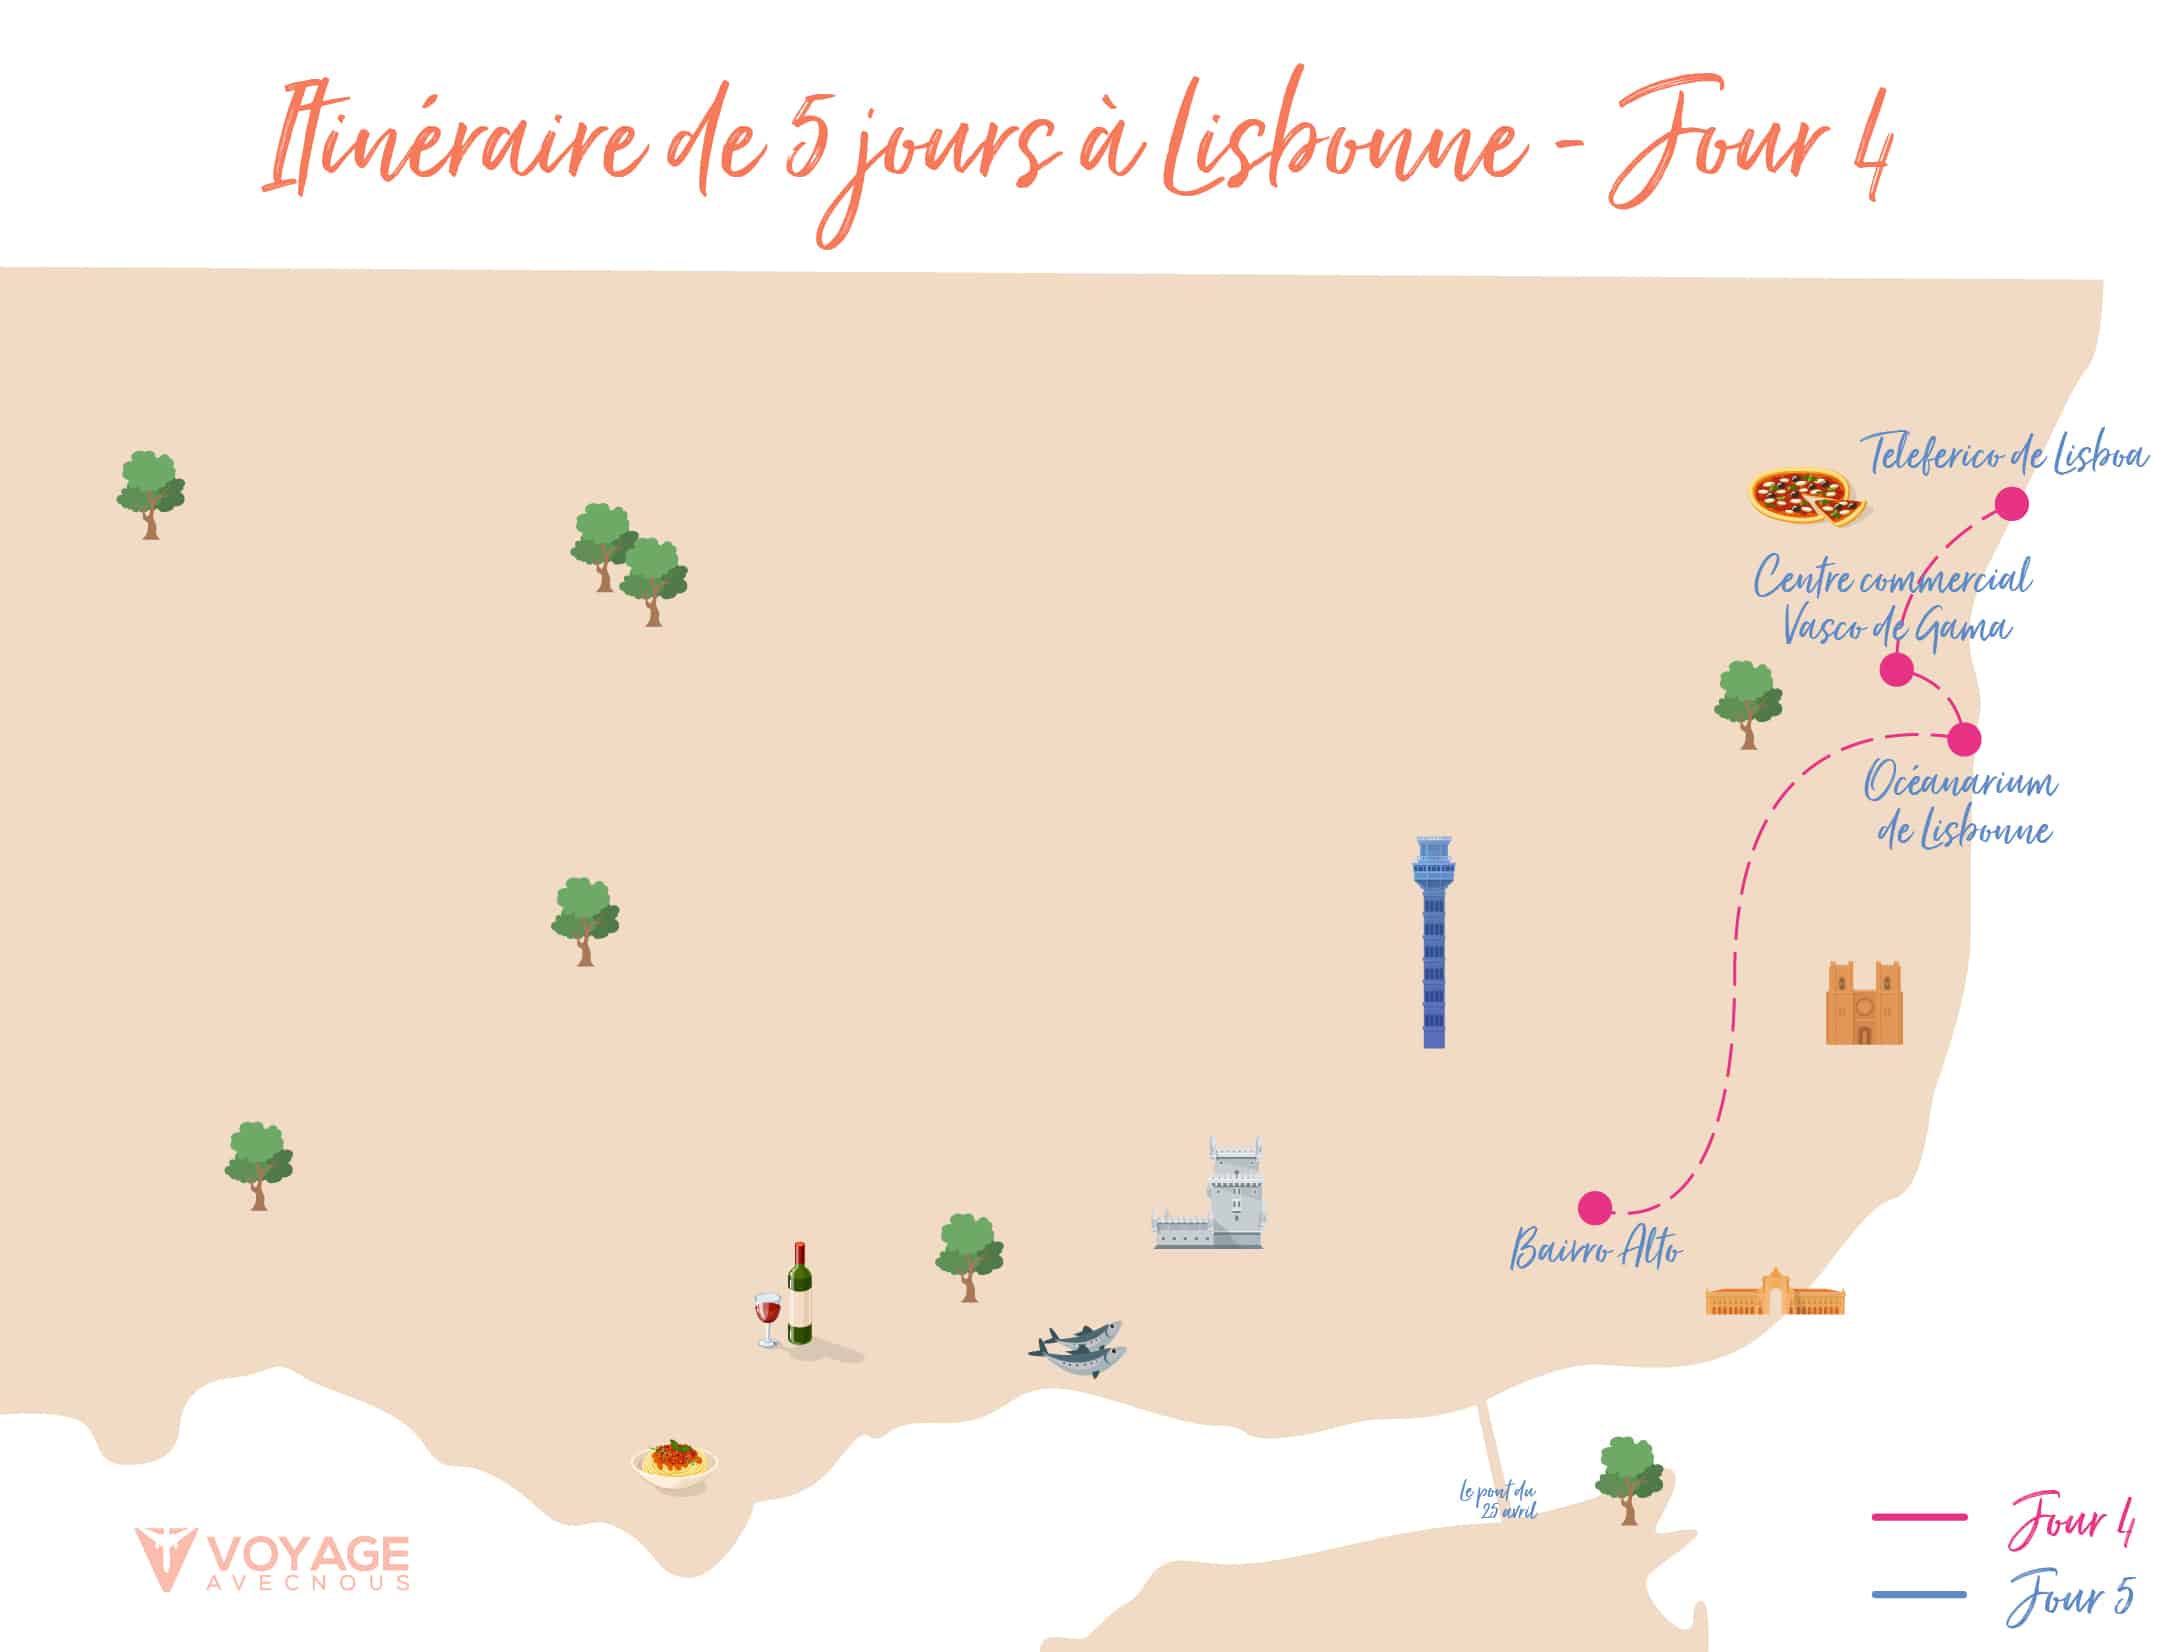 itineraire jour 4 tage